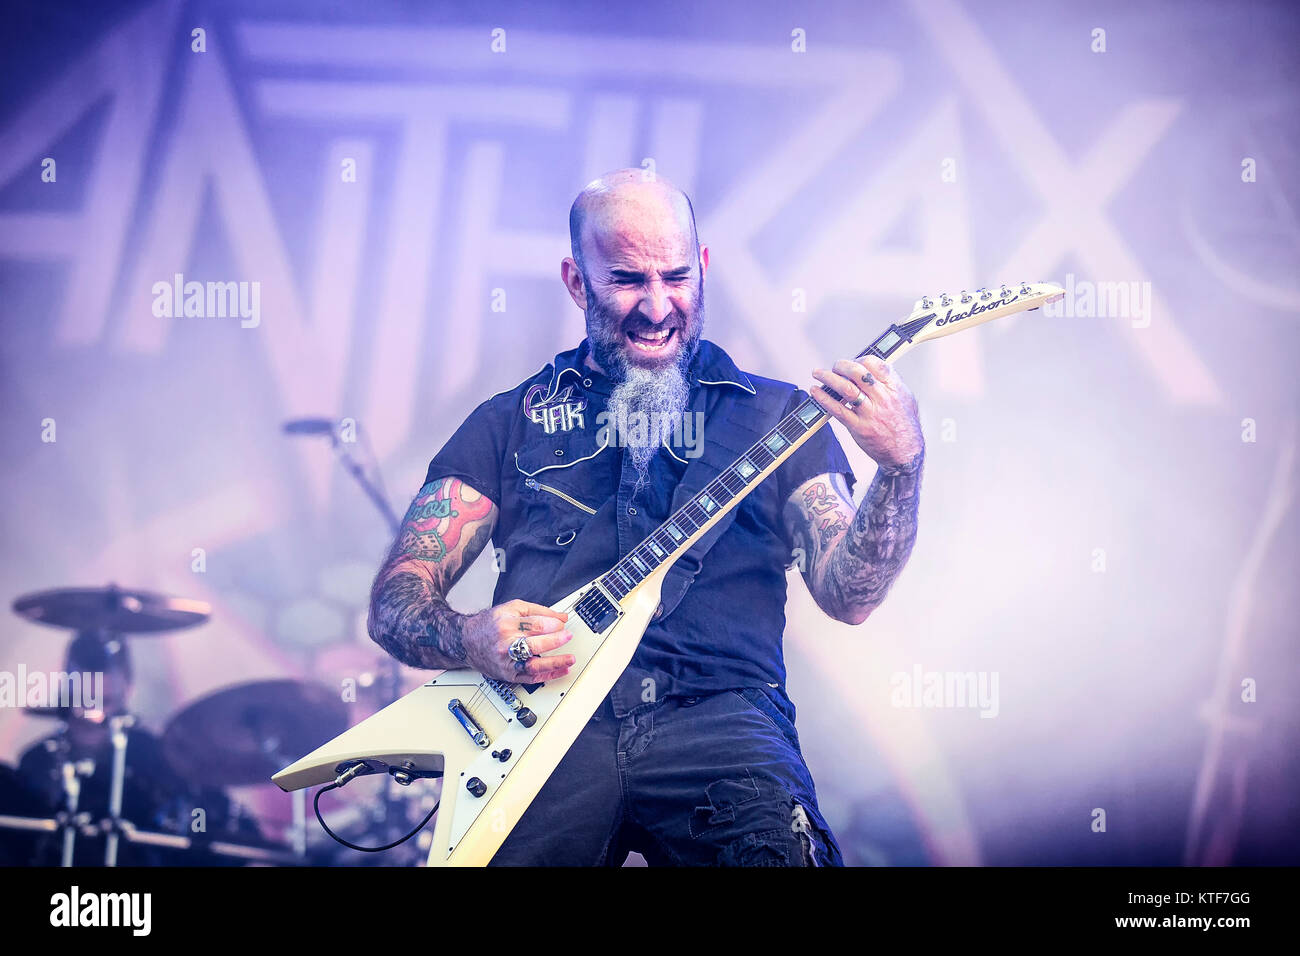 The American thrash metal band Anthrax performs a live concert at the Swedish music festival Sweden Rock Festival 2016. Here guitarist Scott Ian is seen live on stage. Sweden, 11/06 2016. Stock Photo